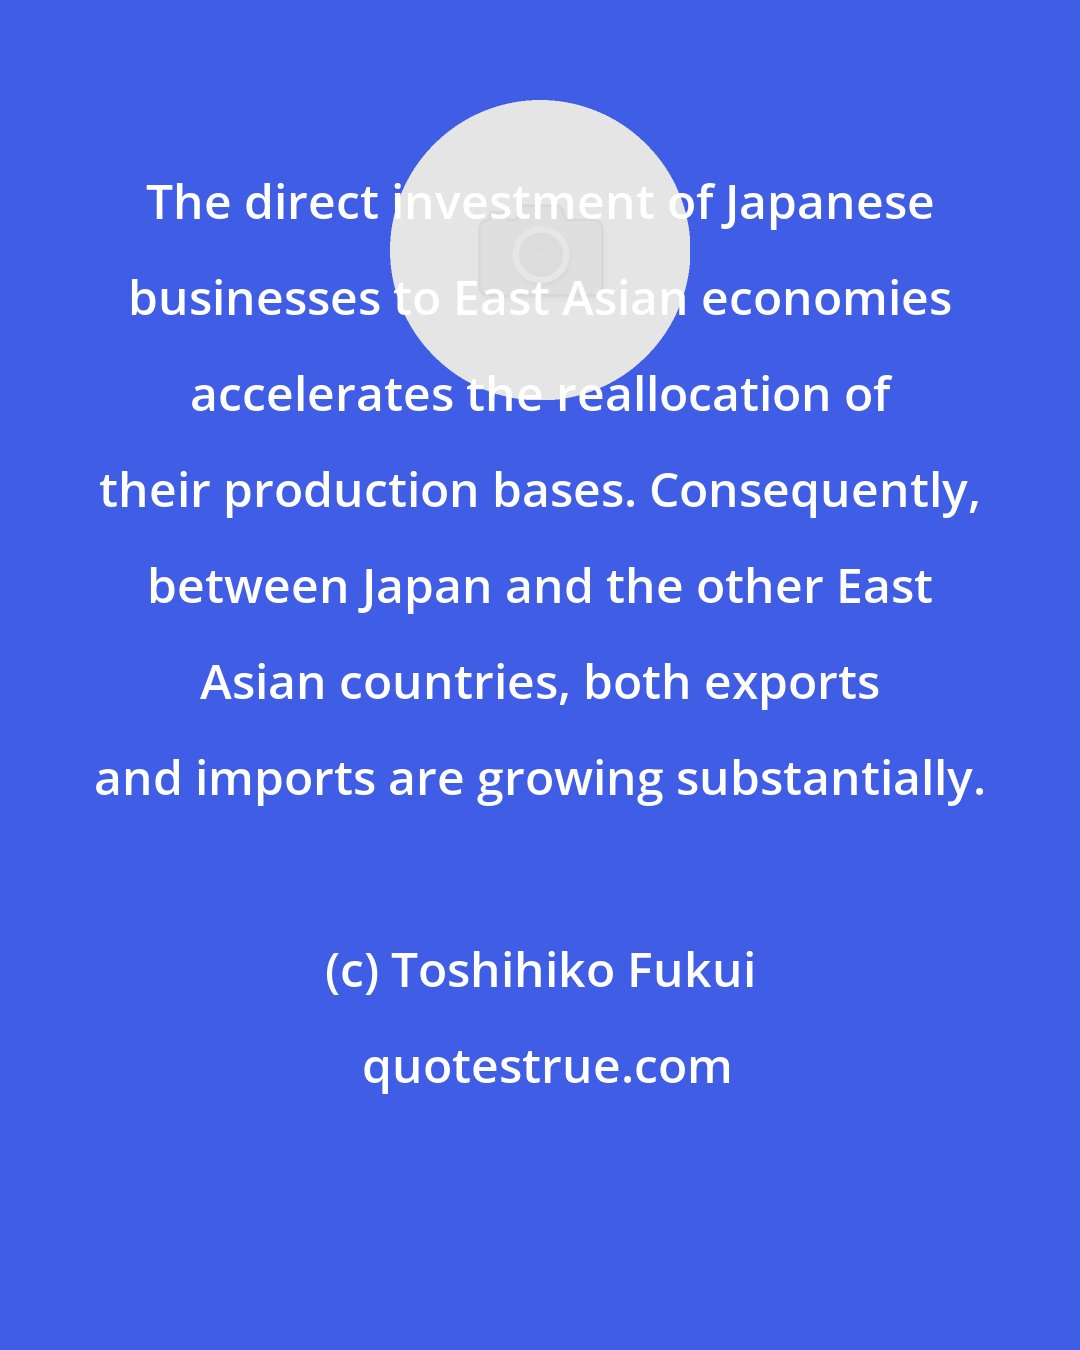 Toshihiko Fukui: The direct investment of Japanese businesses to East Asian economies accelerates the reallocation of their production bases. Consequently, between Japan and the other East Asian countries, both exports and imports are growing substantially.